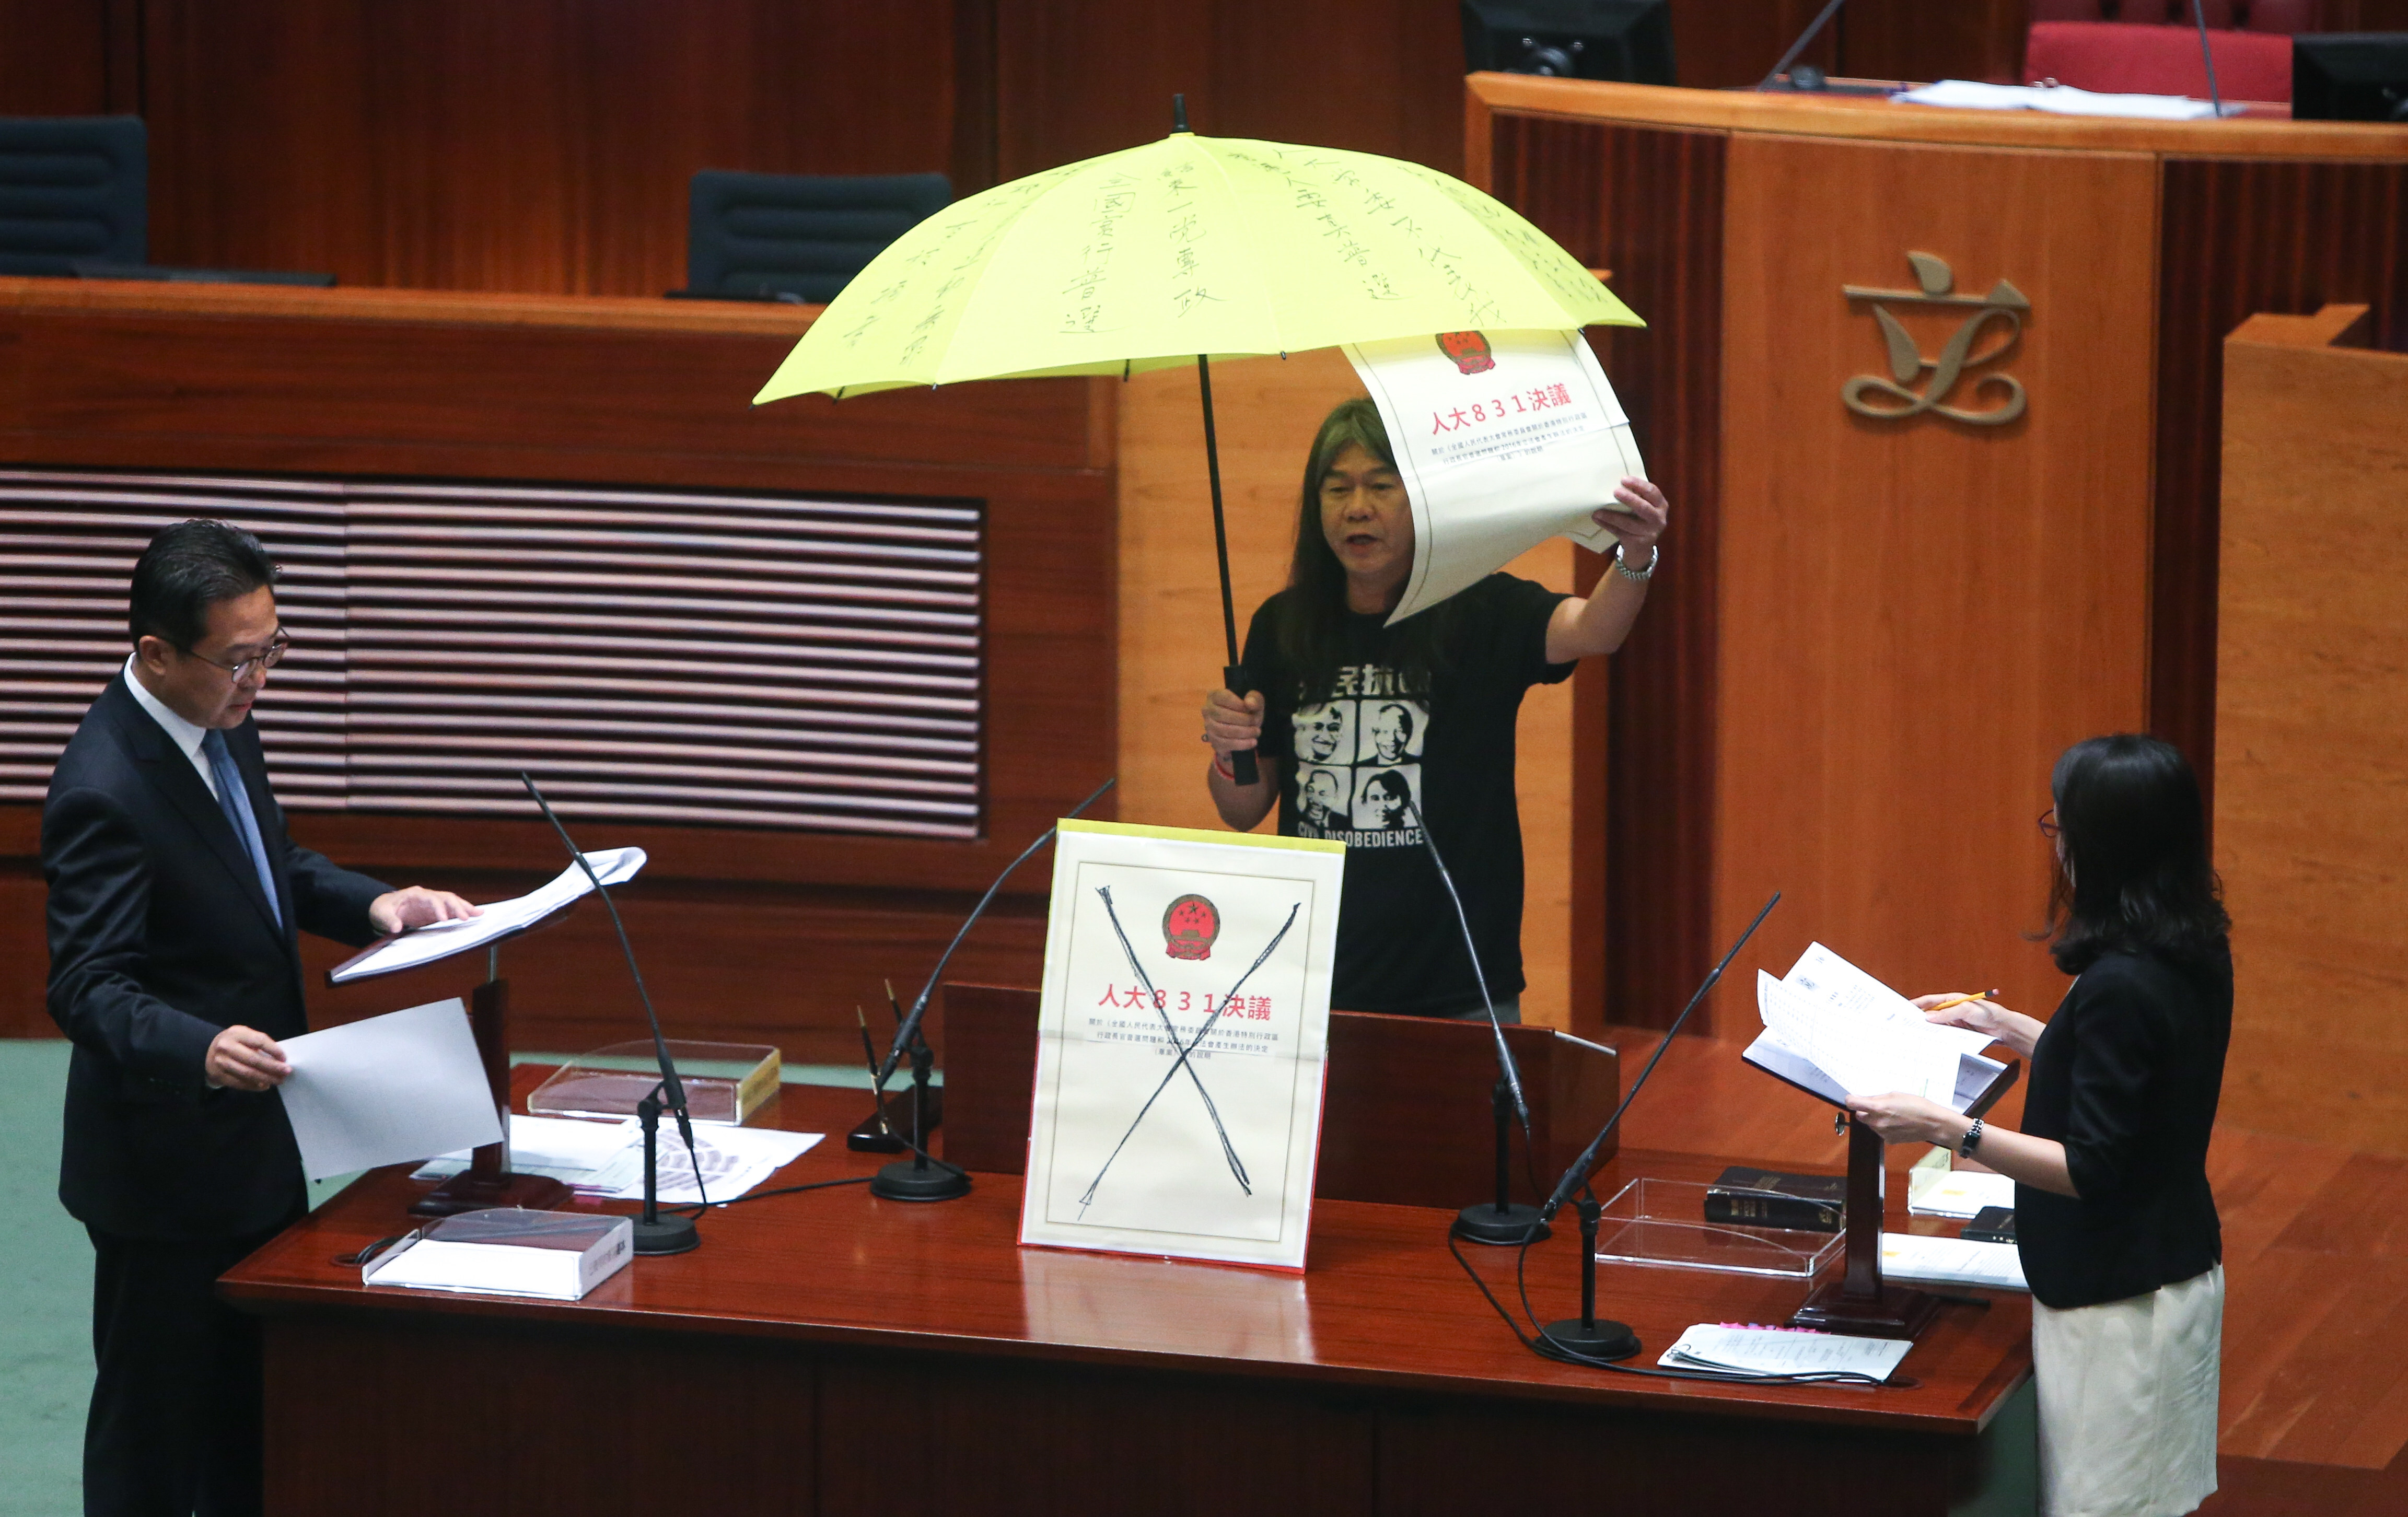 Moves such as raising an umbrella, carried out here by former legislator Leung Kwok-hung in 2016, during oath-taking is not acceptable, officials have warned. Photo: Dickson Lee